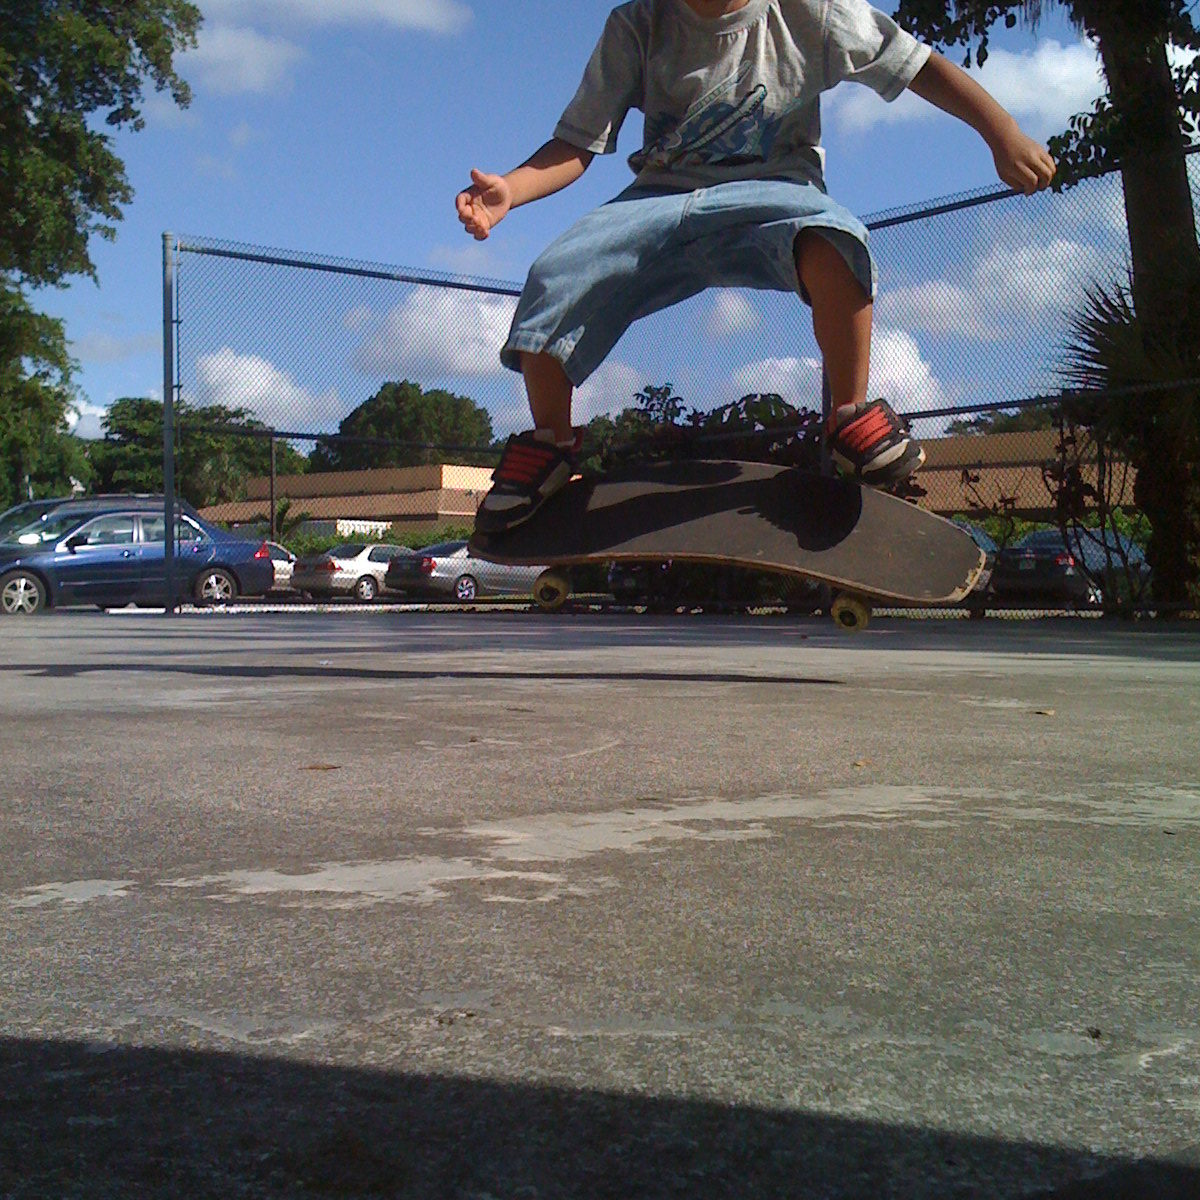 Jose D. Castillo does ollie at 5 years old, October 4, 2009